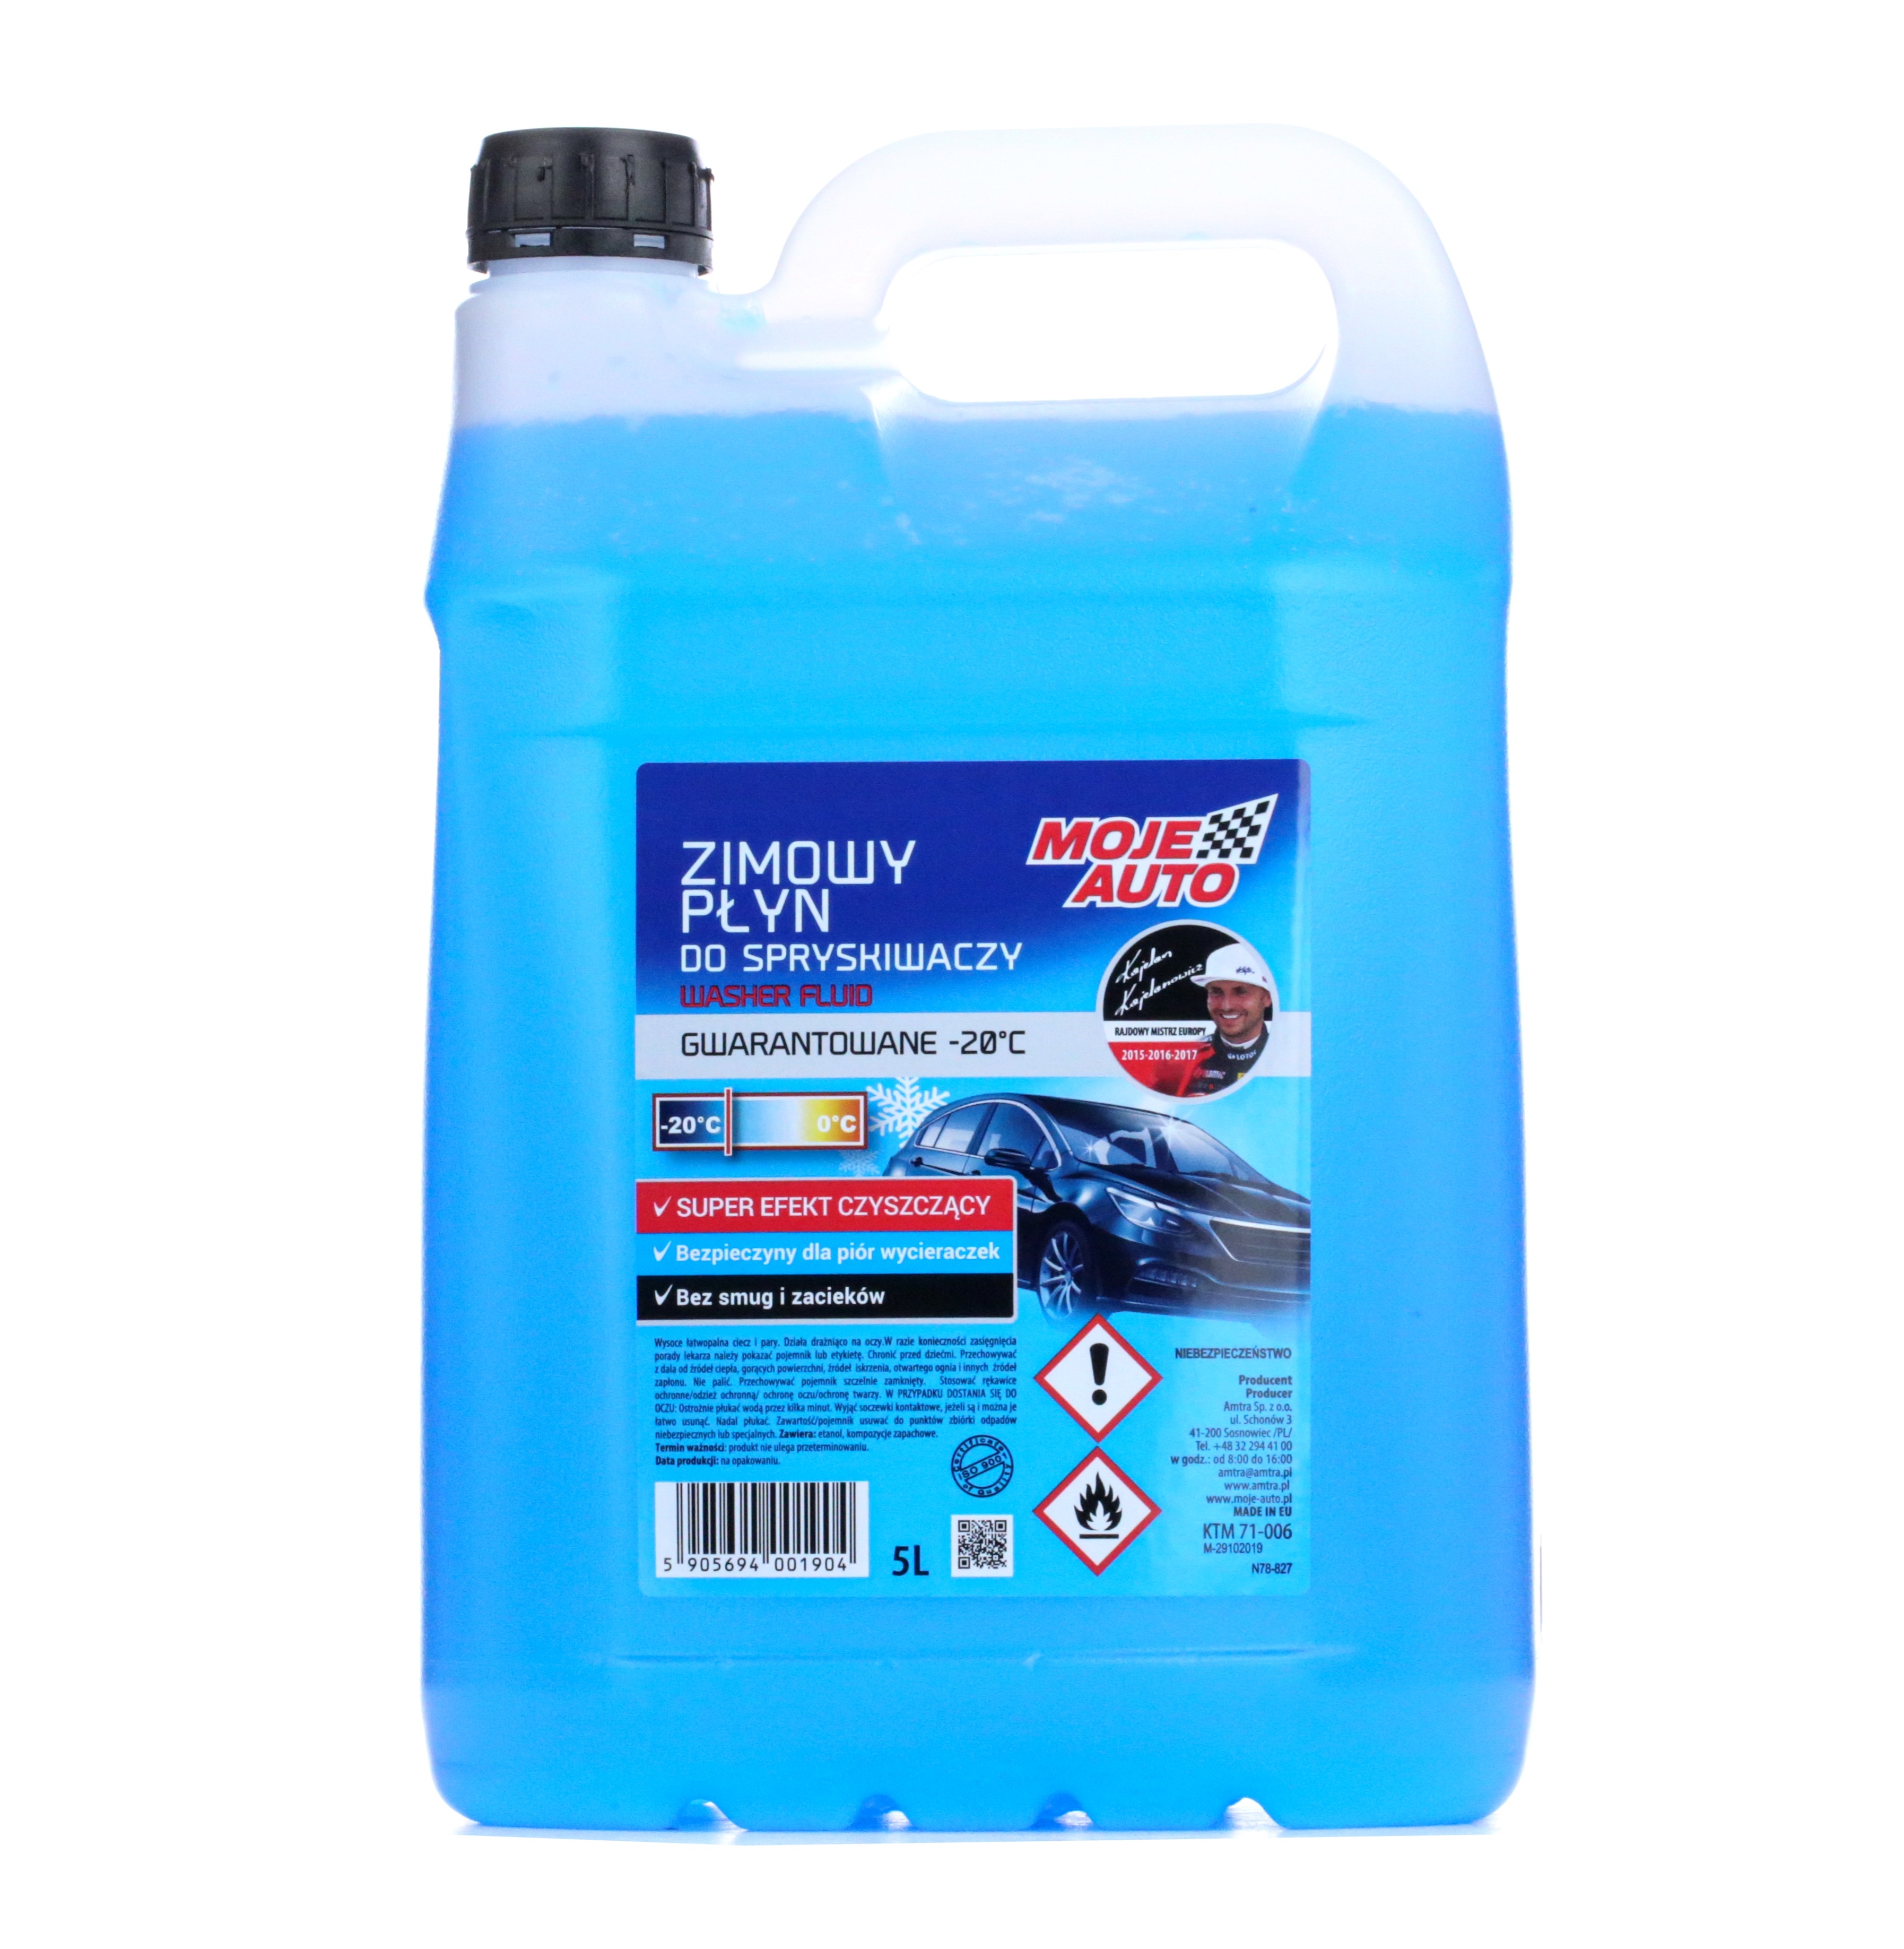 MOJE AUTO Winter screenwash 71-006 at a discount — buy now!